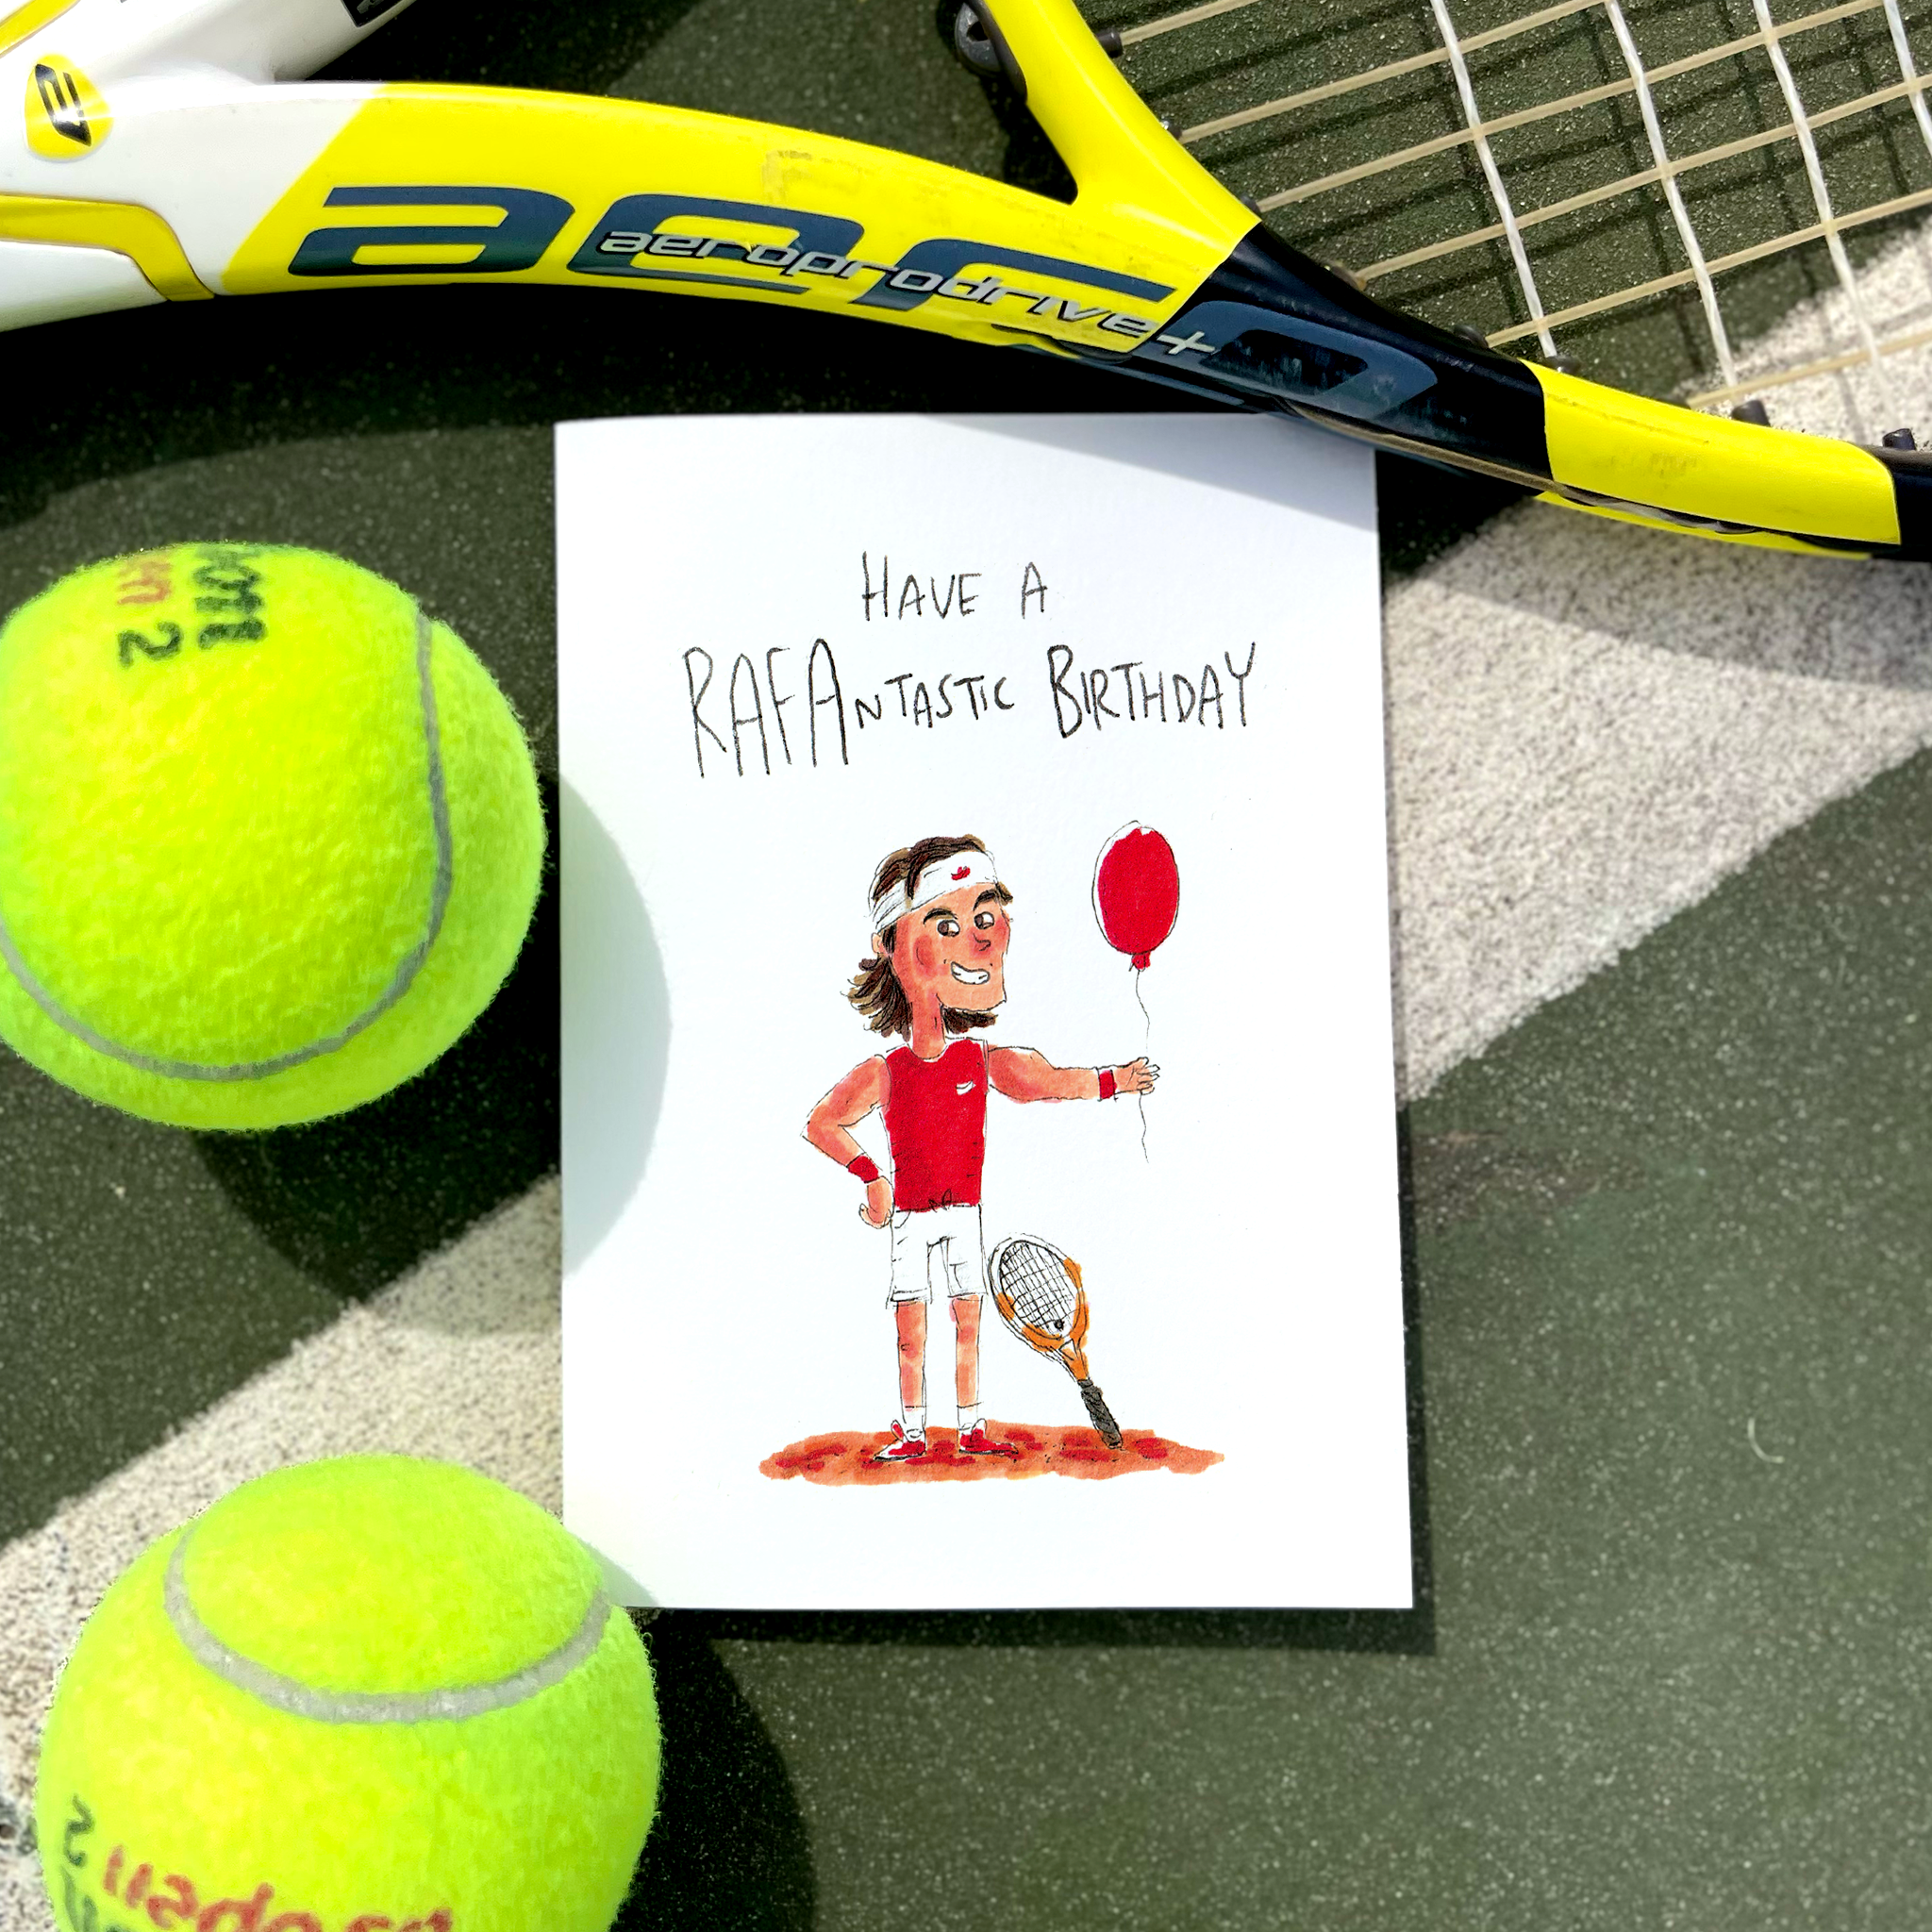 Have a RAFAntastic Birthday - TENNIS FANS collection